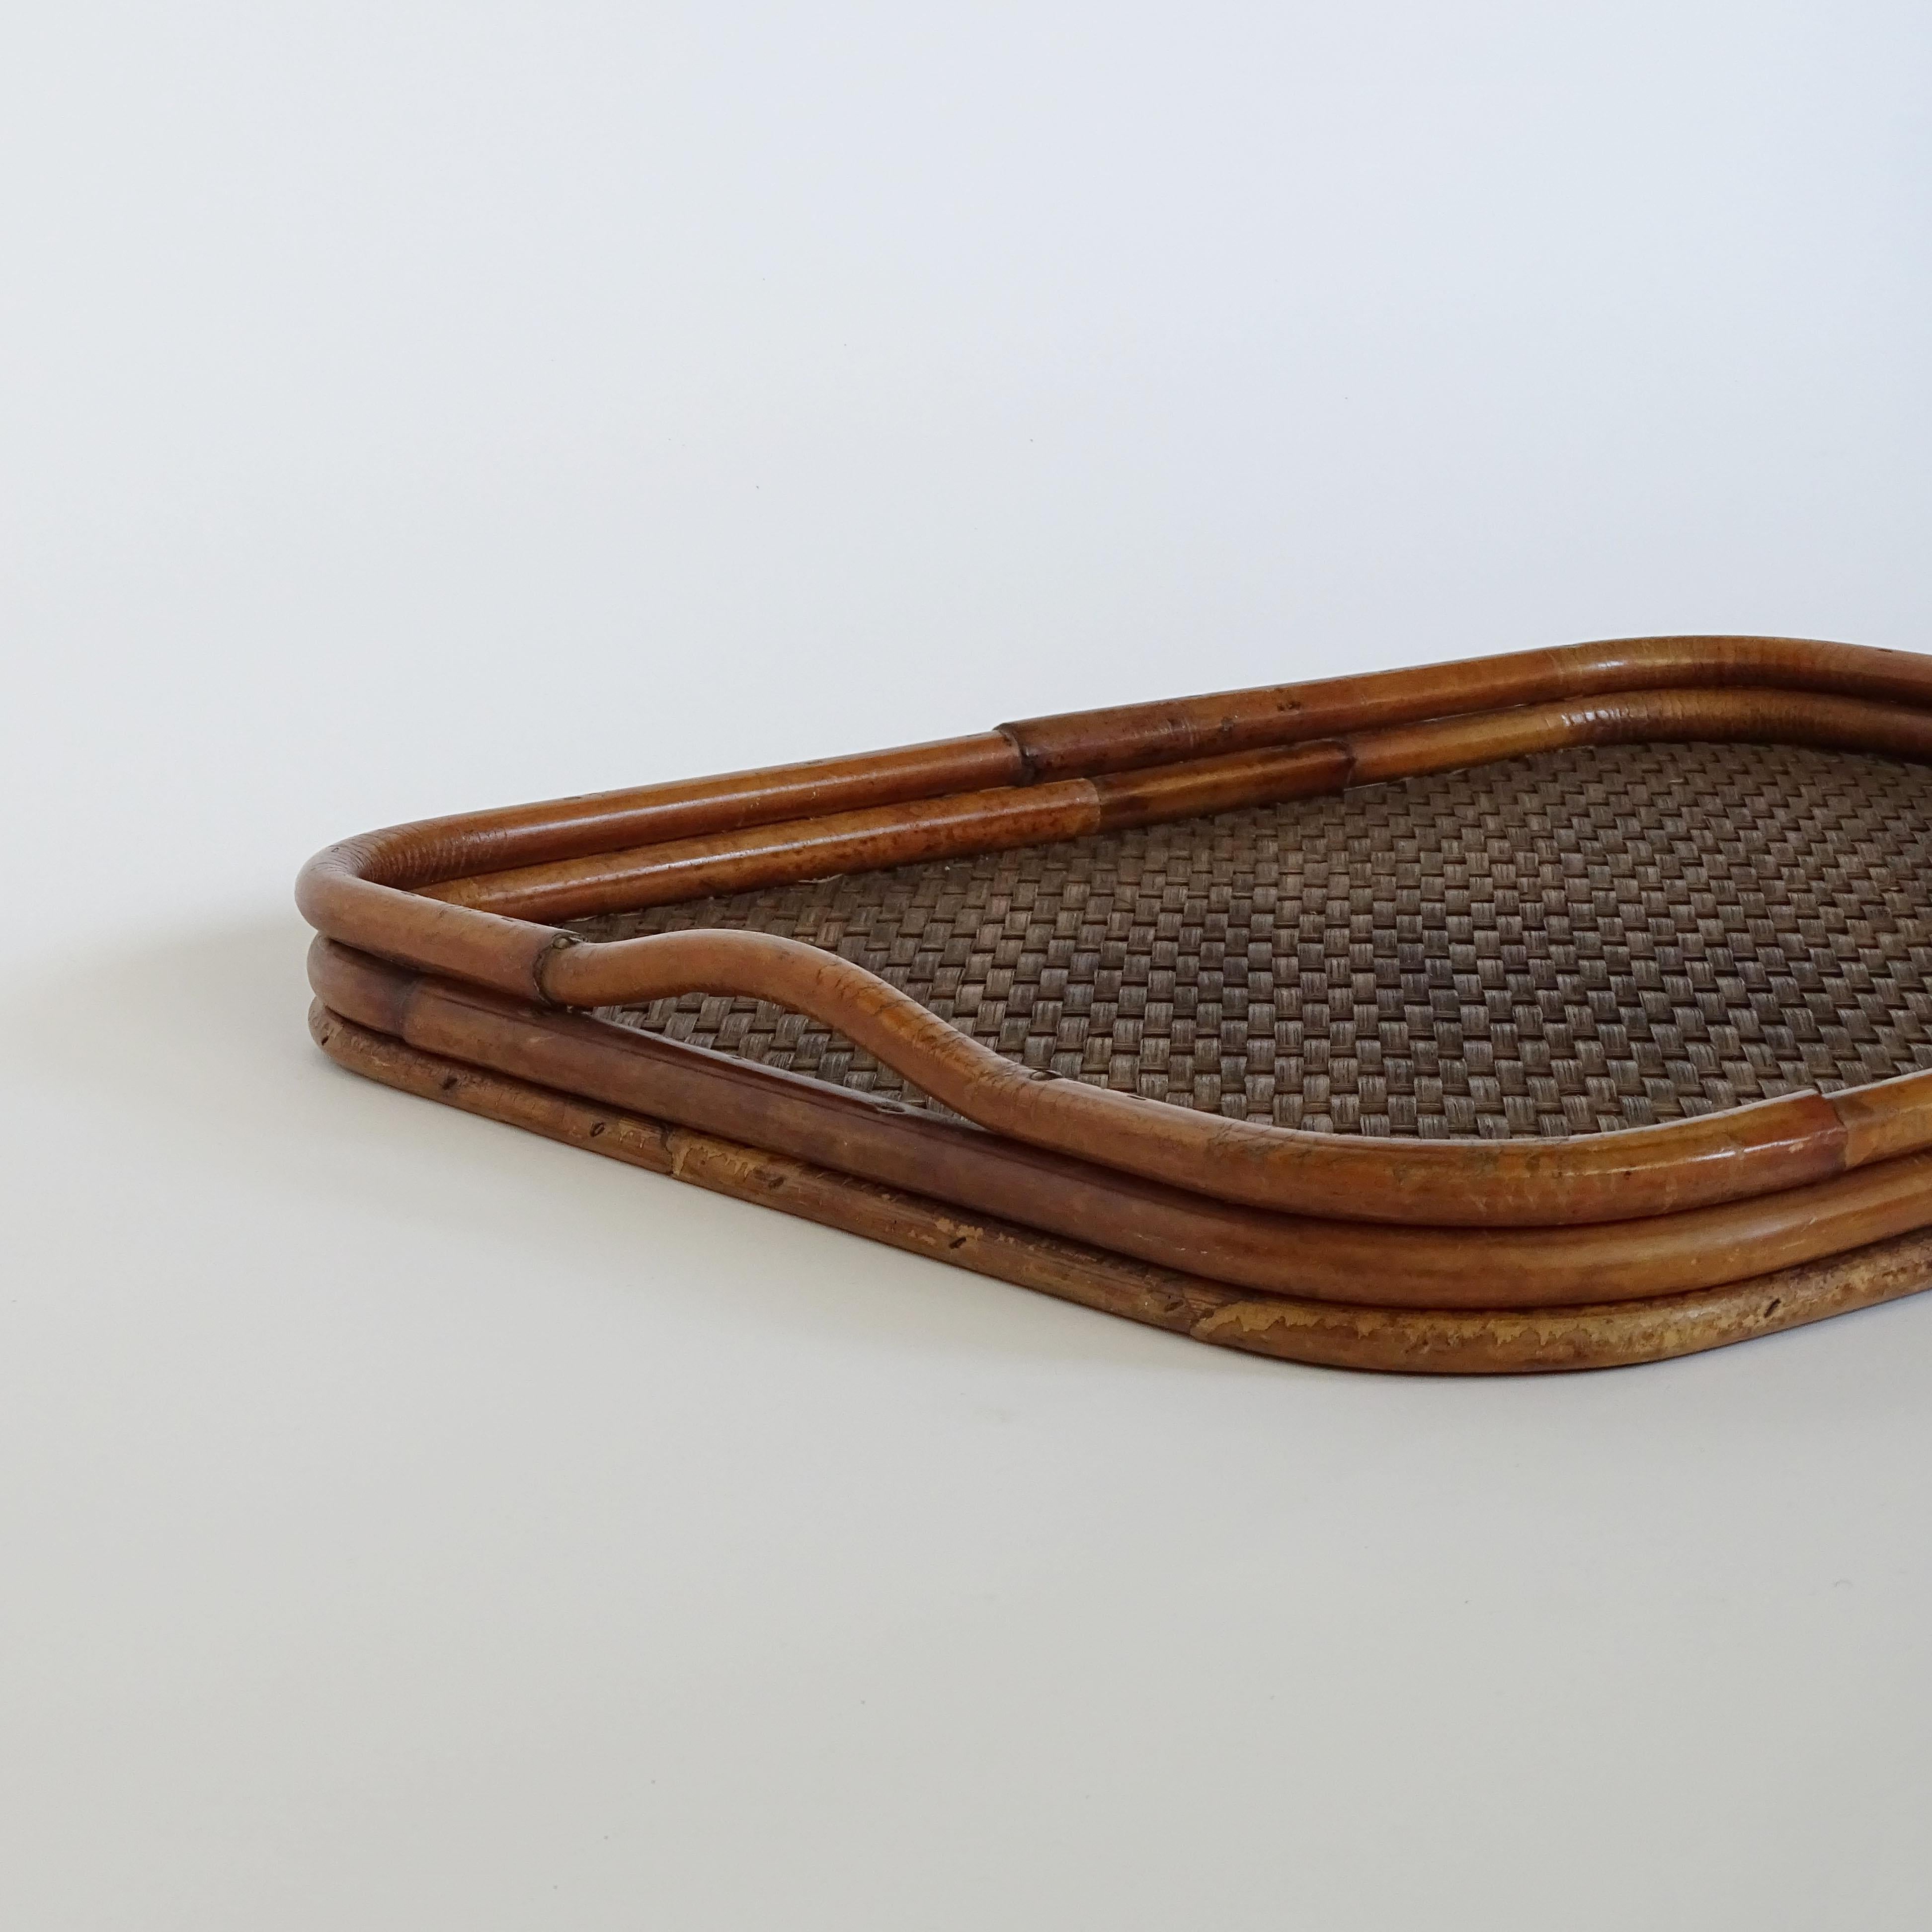 Modern Gabriella Crespi Bamboo and Rattan Large Serving Tray, Italy, 1970s